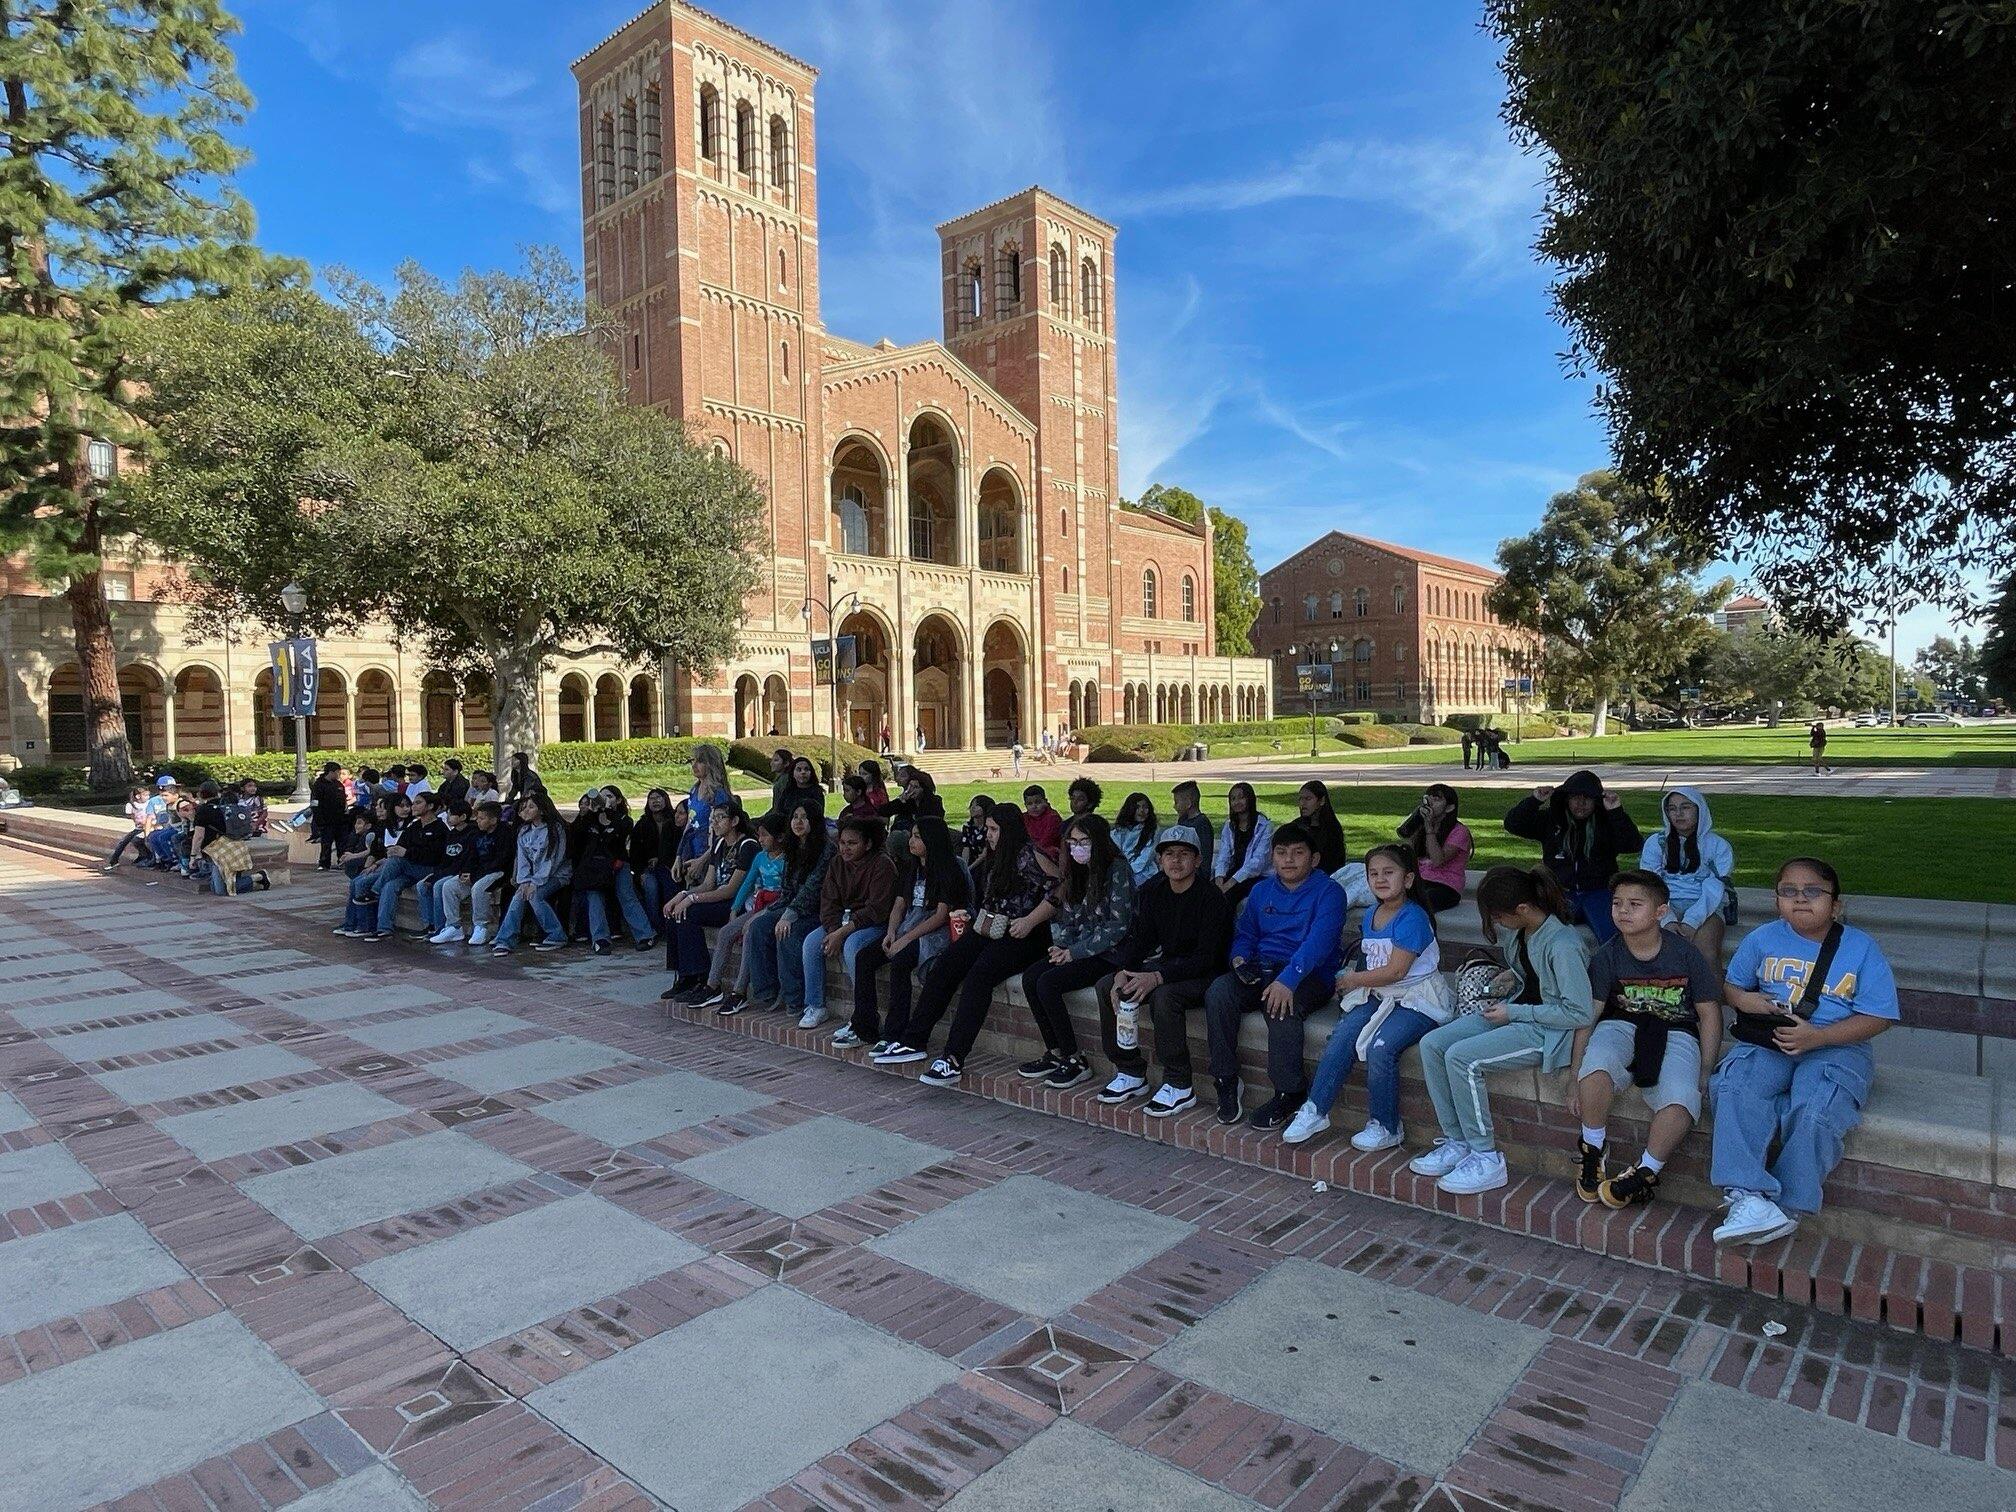 A diverse group of students are seated on steps outdoors, with a large, impressive brick building featuring arched doorways and a tower in the background, reminiscent of collegiate Gothic architecture. The students, mostly wearing casual clothing, seem to be on a campus tour or a school trip, with some looking at the camera and others enjoying the sunny day. The expansive lawn and clear skies suggest a peaceful, academic setting.